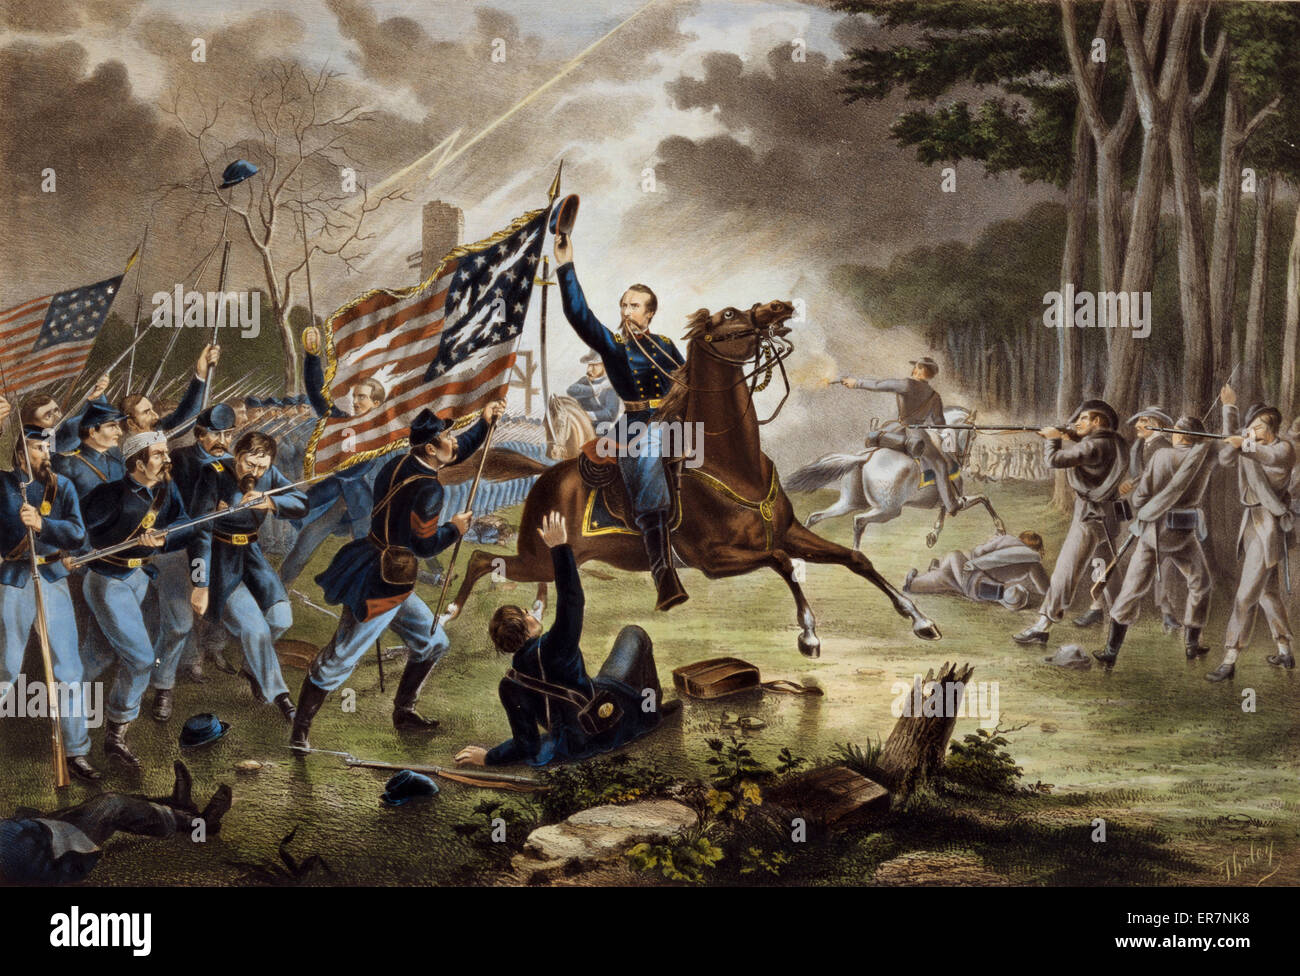 General Kearney's gallant charge, at the Battle of Chantilly Stock Photo